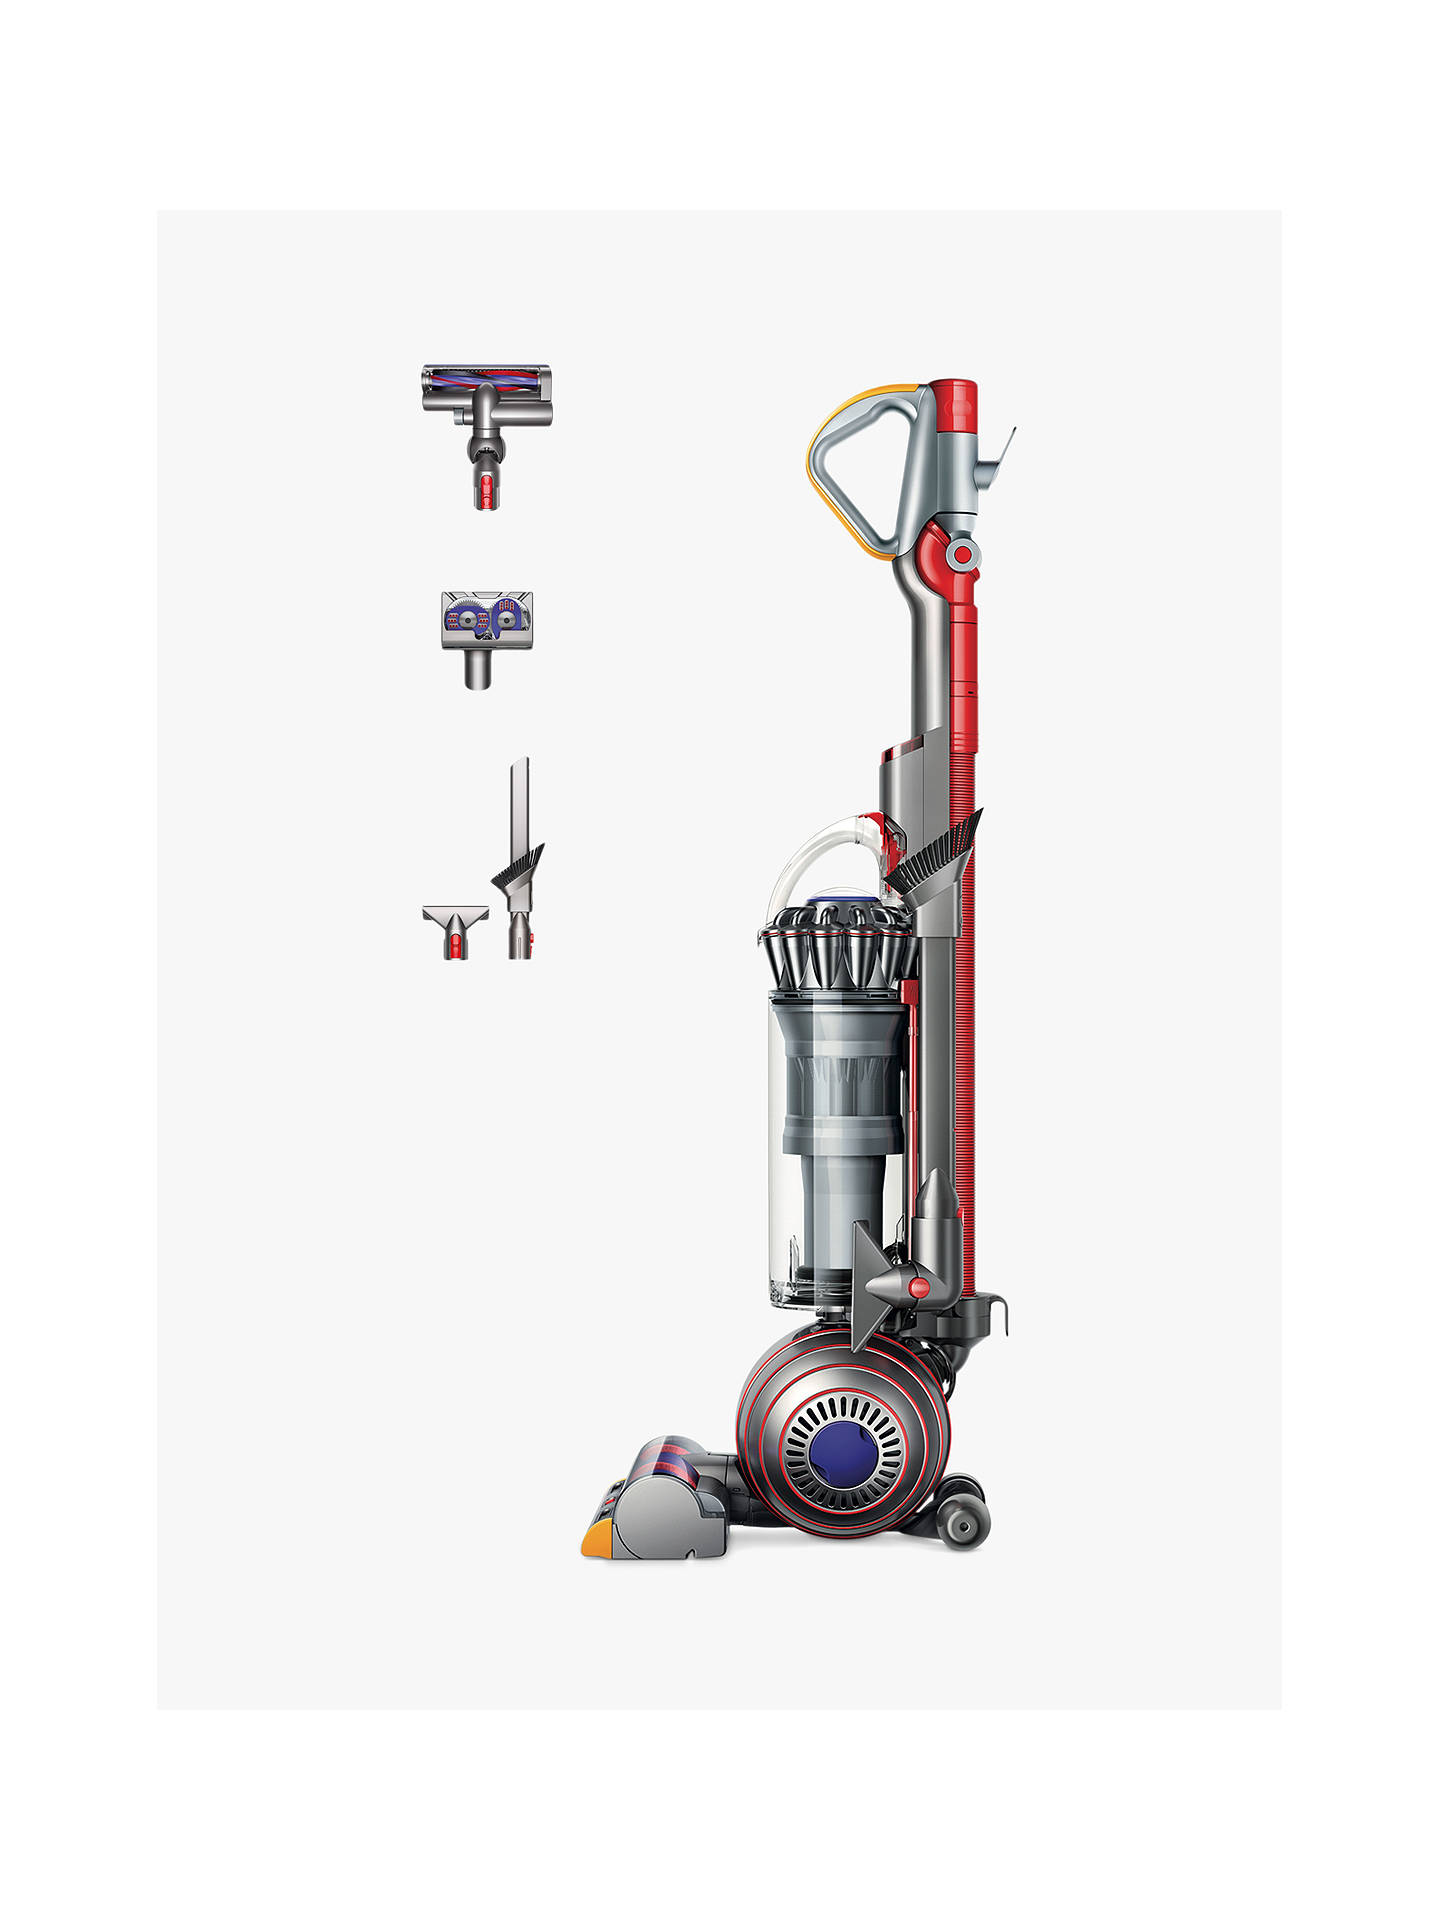 Dyson Ball Animal 2 Upright Vacuum Cleaner